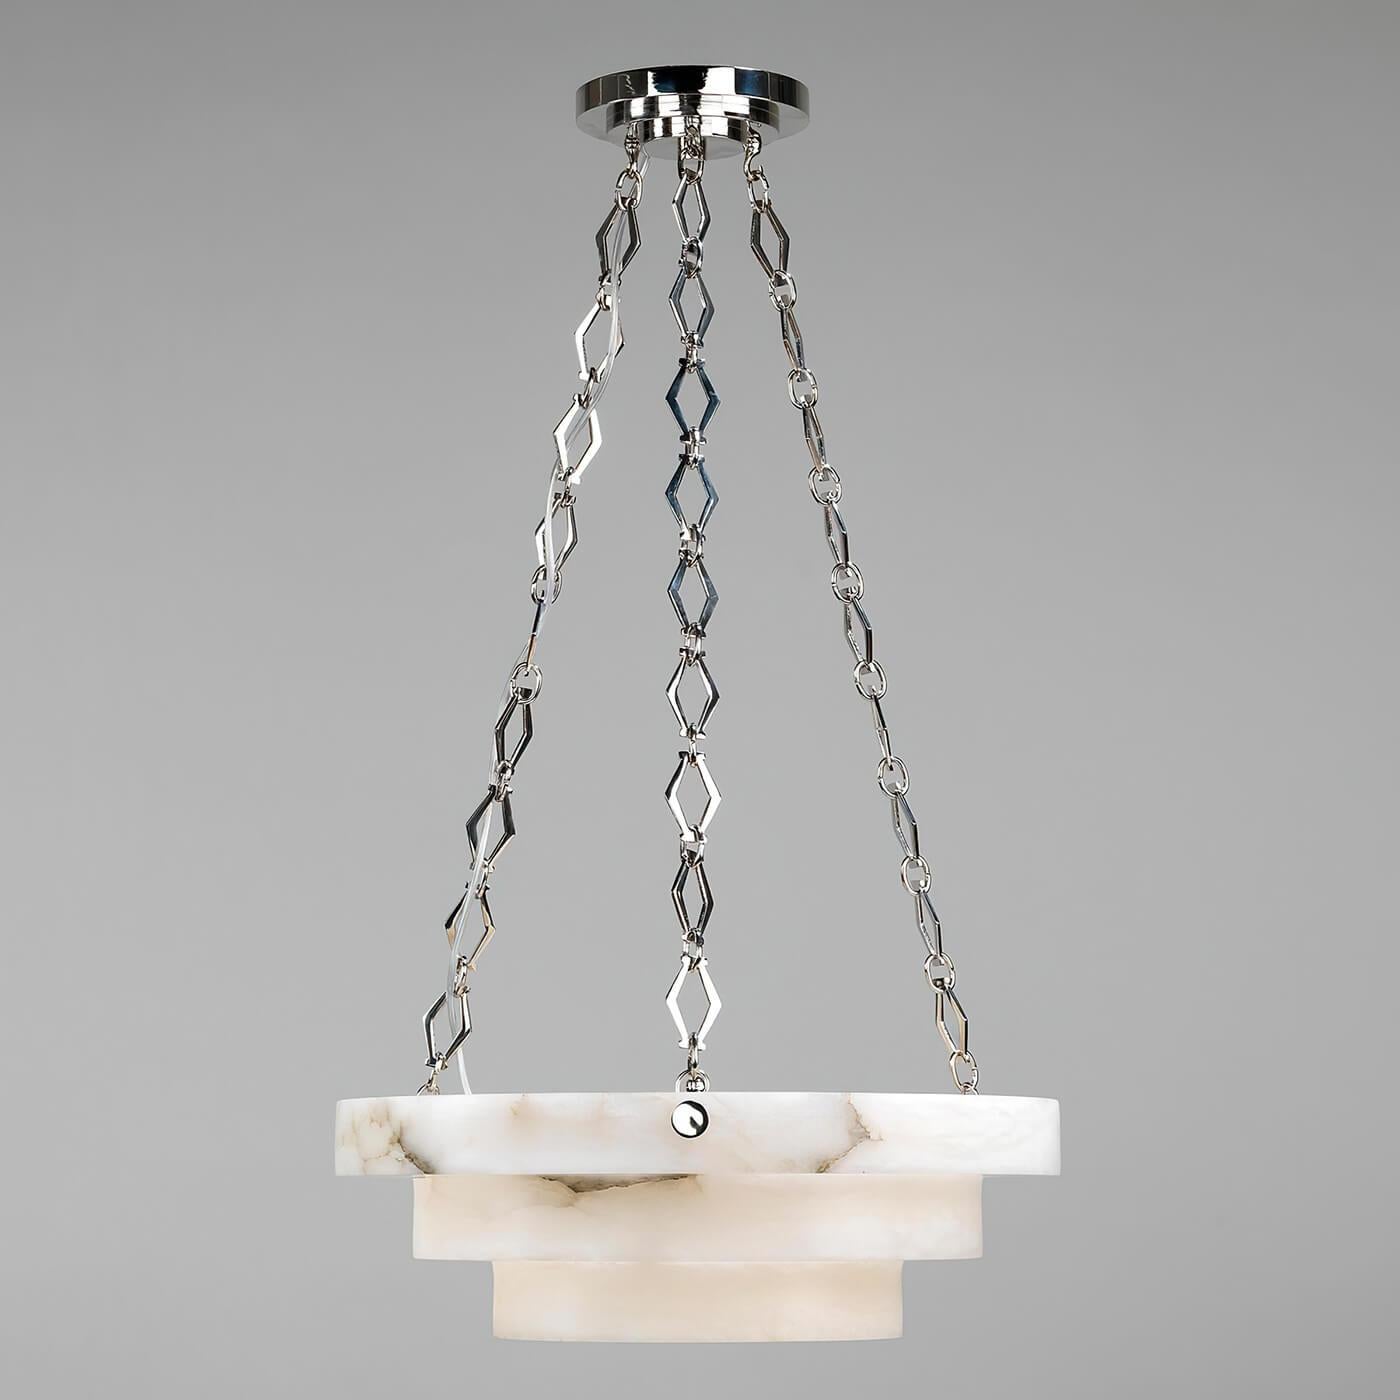 An Art Deco-inspired chandelier, understated in style, with a fine hand-finished Italian alabaster bowl suspended from nickel-plated diamond-shaped chains. 

All components are produced from solid cast brass, which are then nickel plated, for the